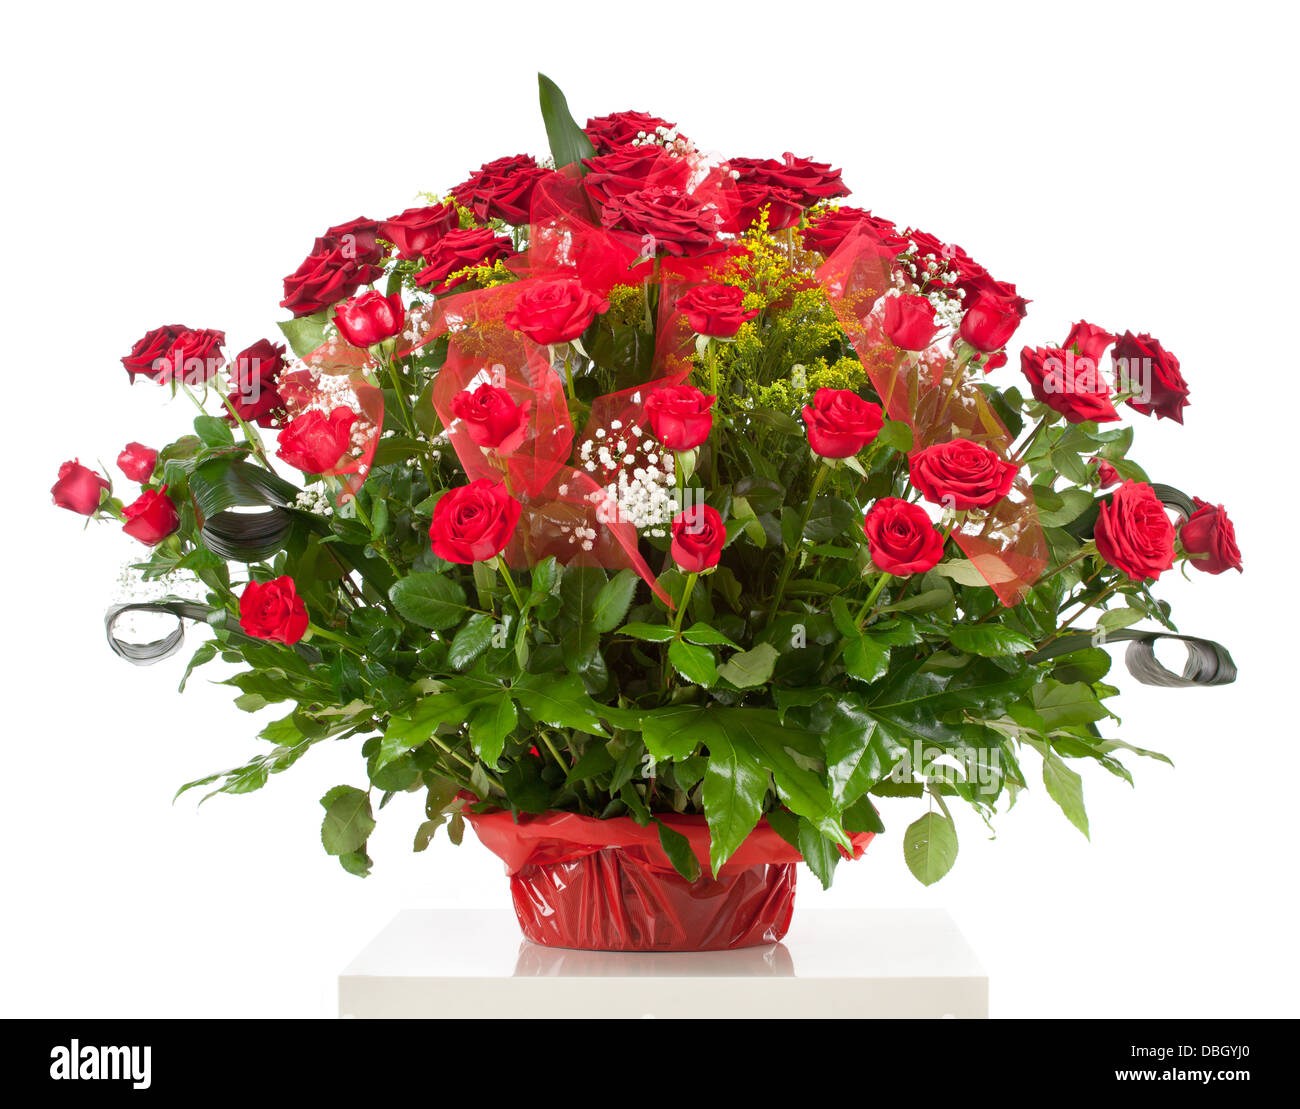 Basket with fifty red roses isolated on white background Stock Photo